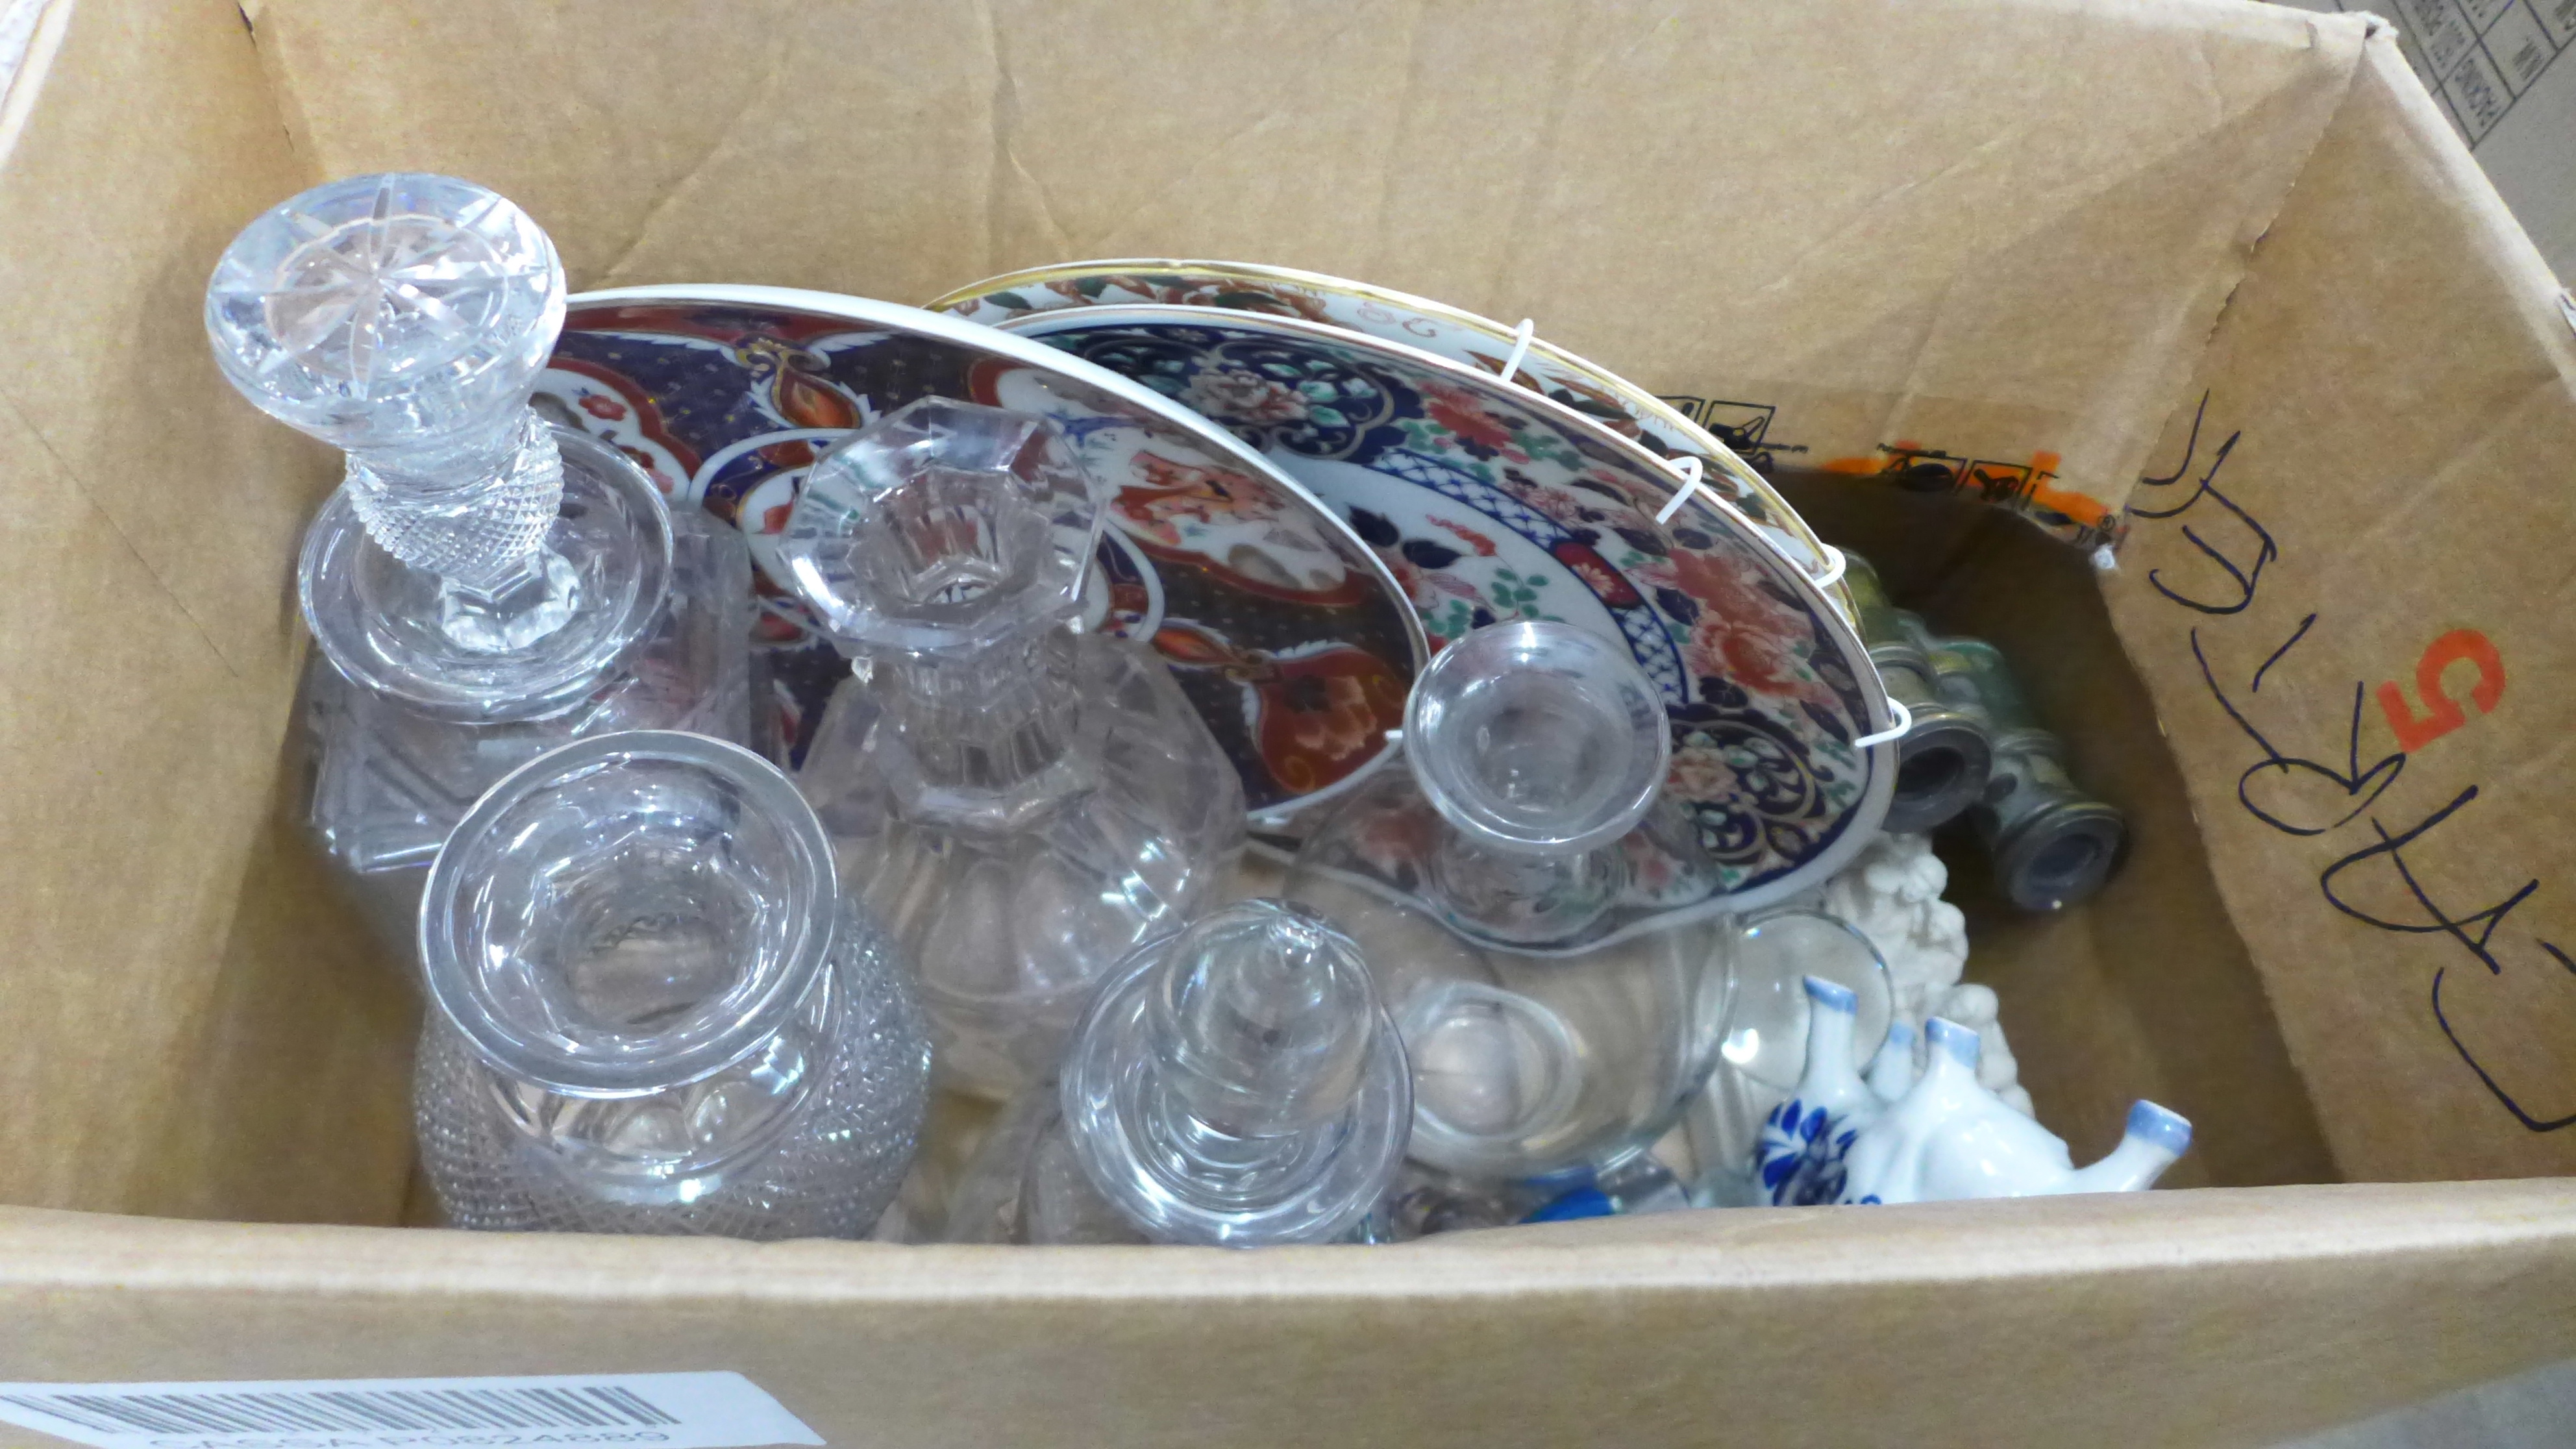 Two boxes of mixed china and glassware including decanters and a vase, novelty glass top and gilt - Image 2 of 3